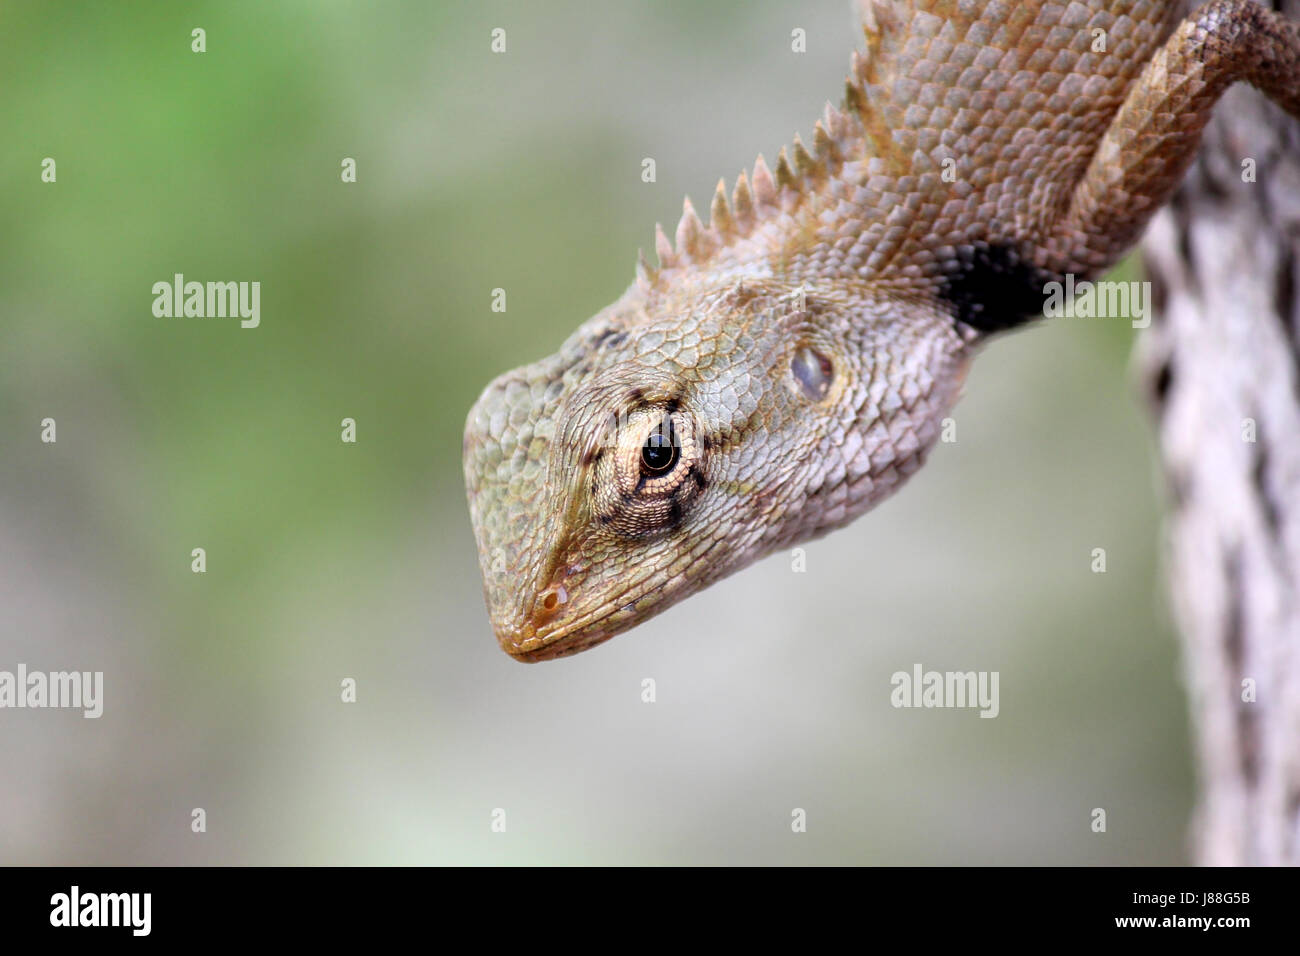 closeup of  lizard chameleon on tree with nature background Stock Photo